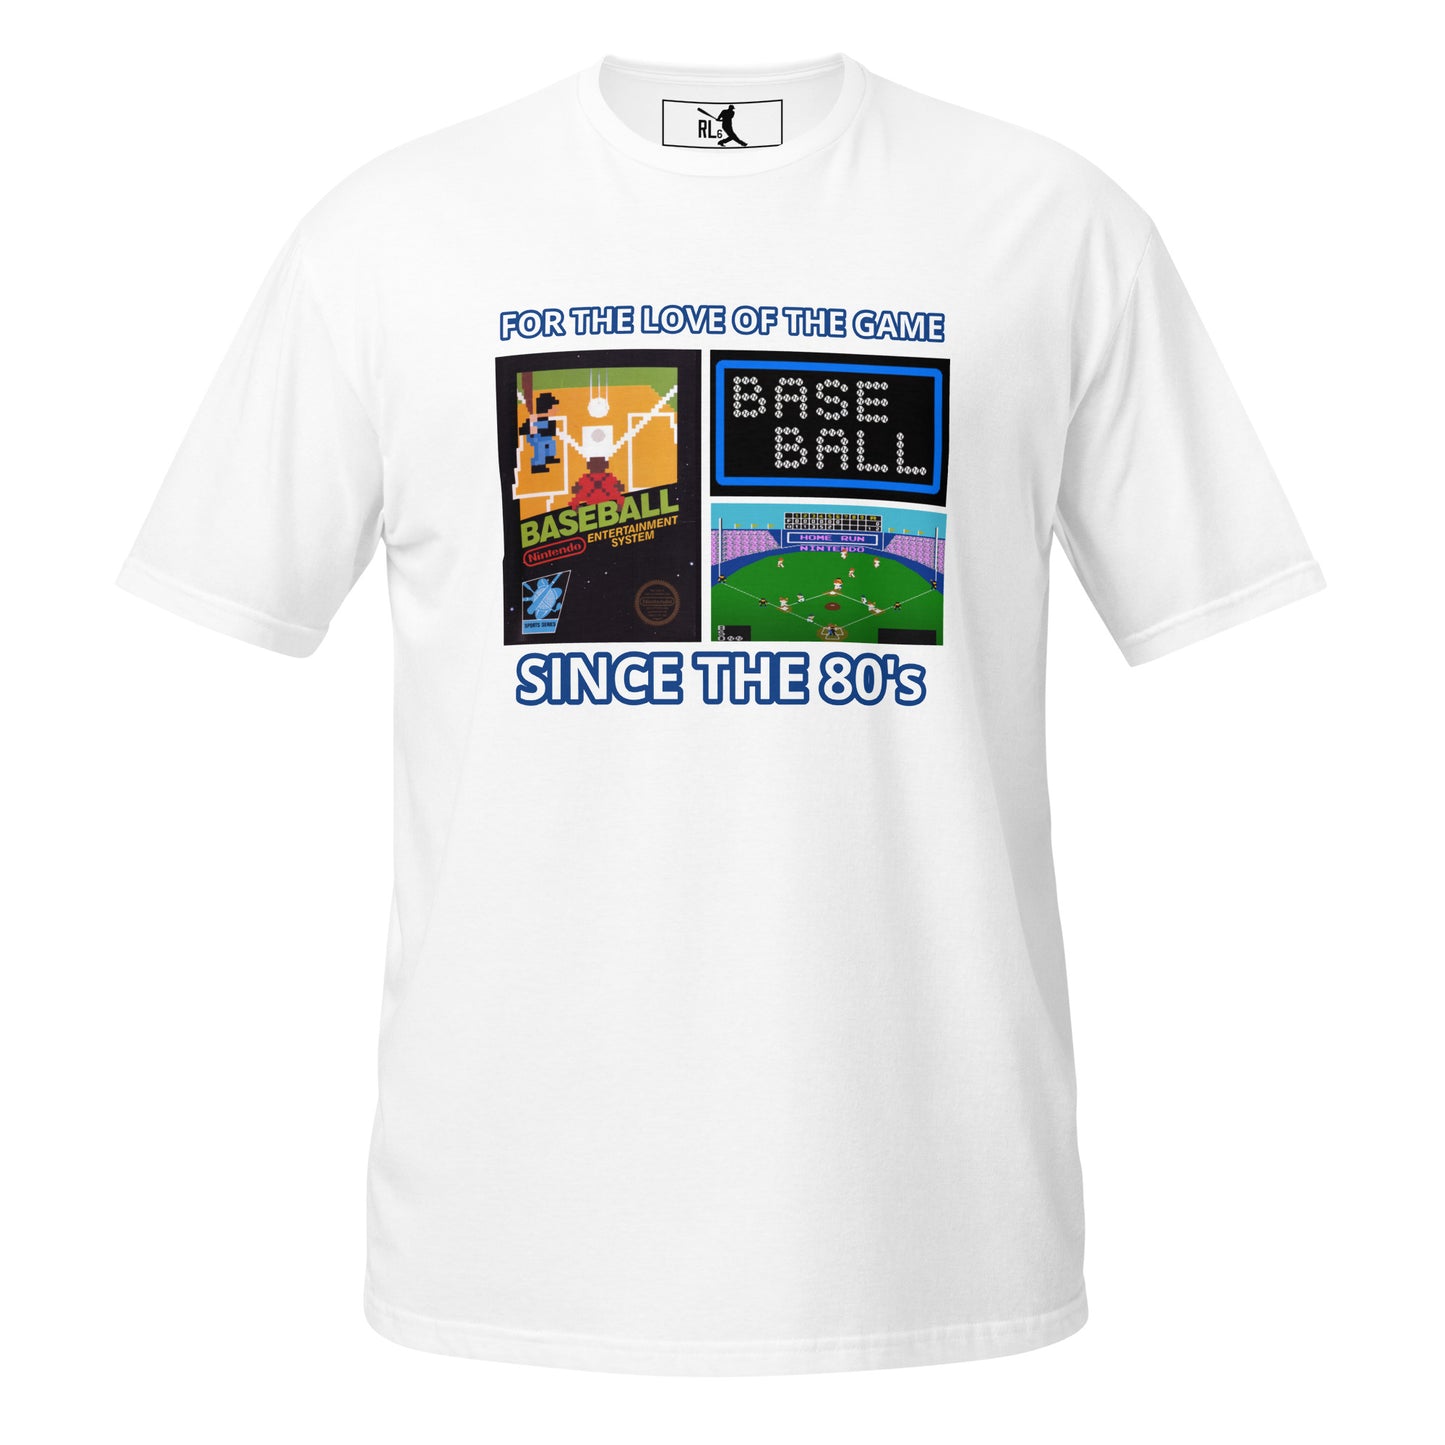 RL6 T-shirt Unisexe - For The Love Of The Game sinc the 80's